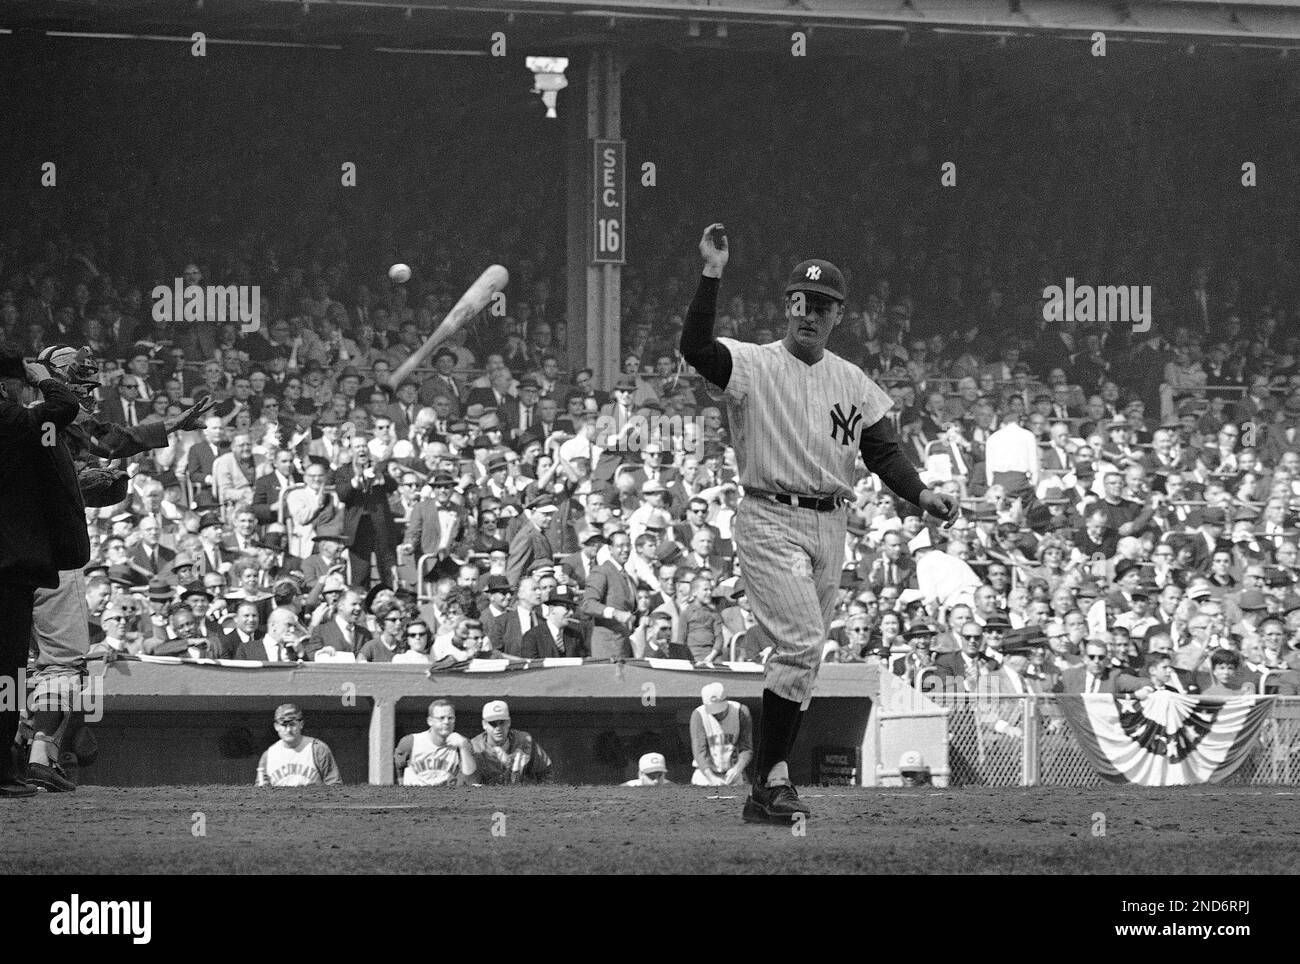 Roger maris Black and White Stock Photos & Images - Alamy